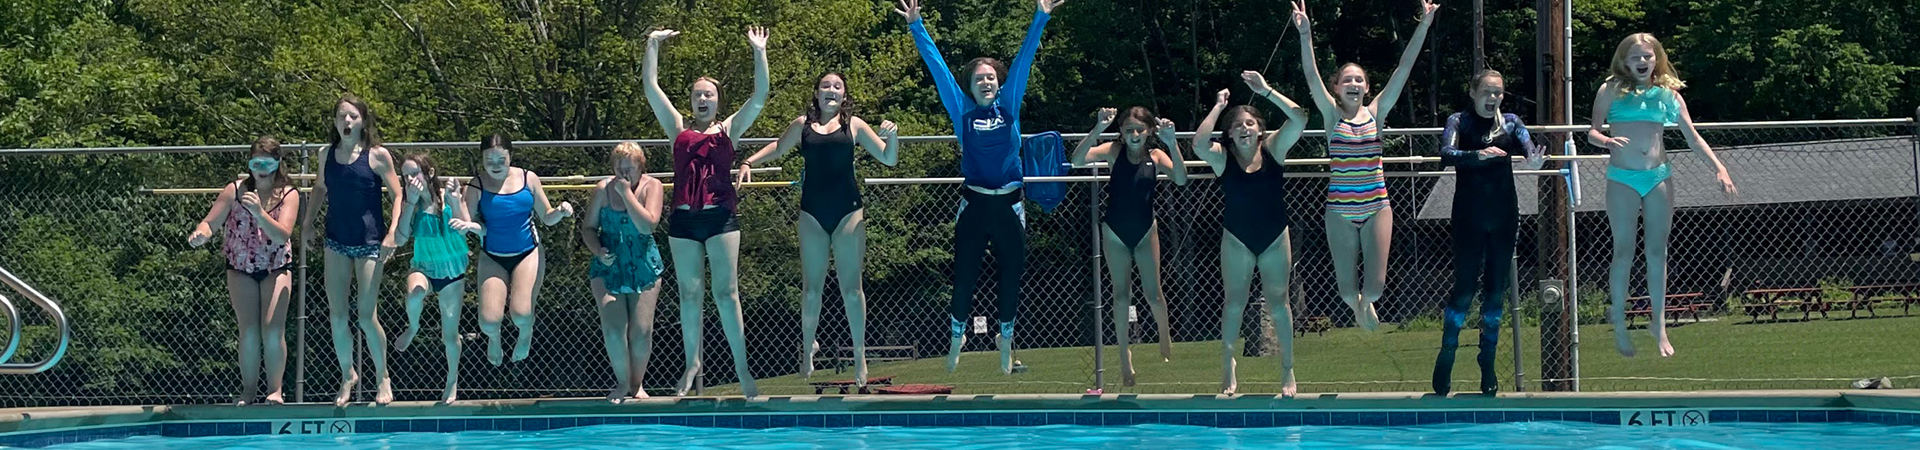  Girls jumping into a pool 